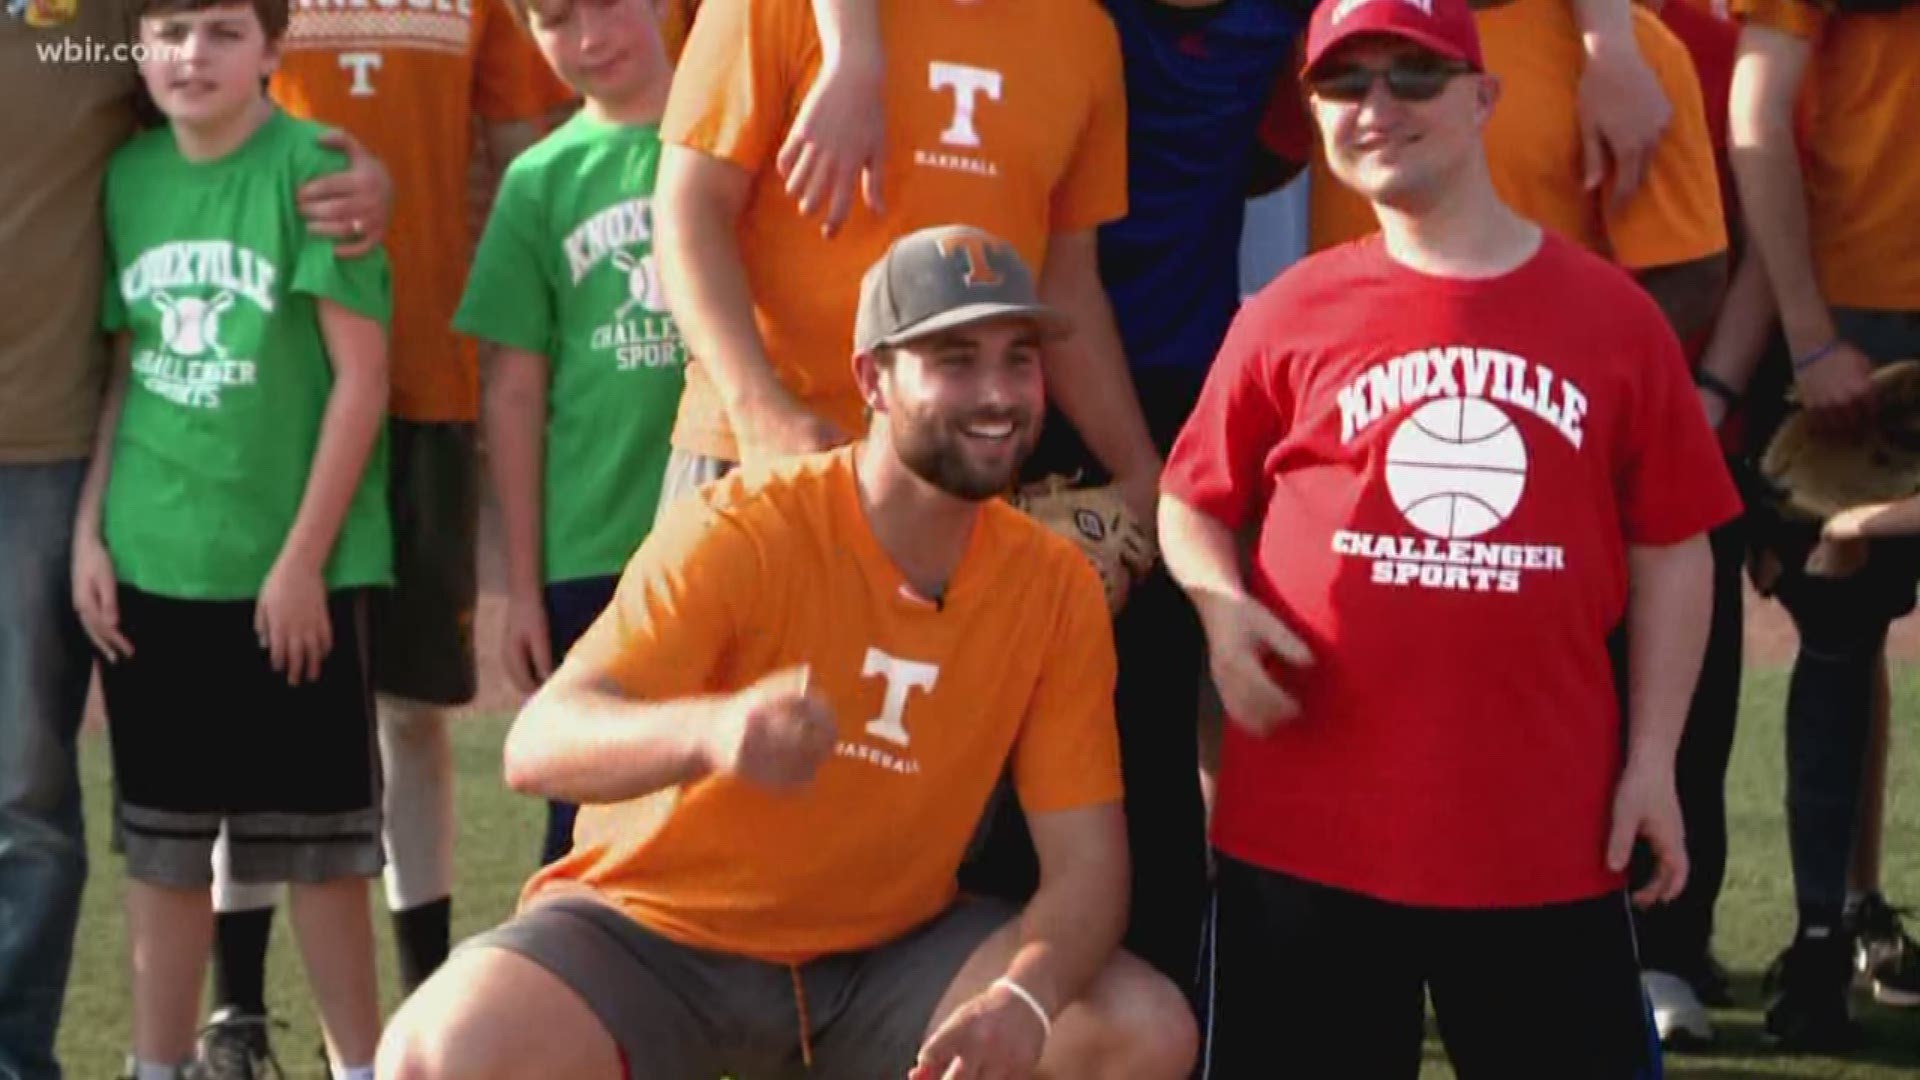 UT Baseball hosted kids from the Knoxville Challenger League at Lindsey Nelson Stadium.